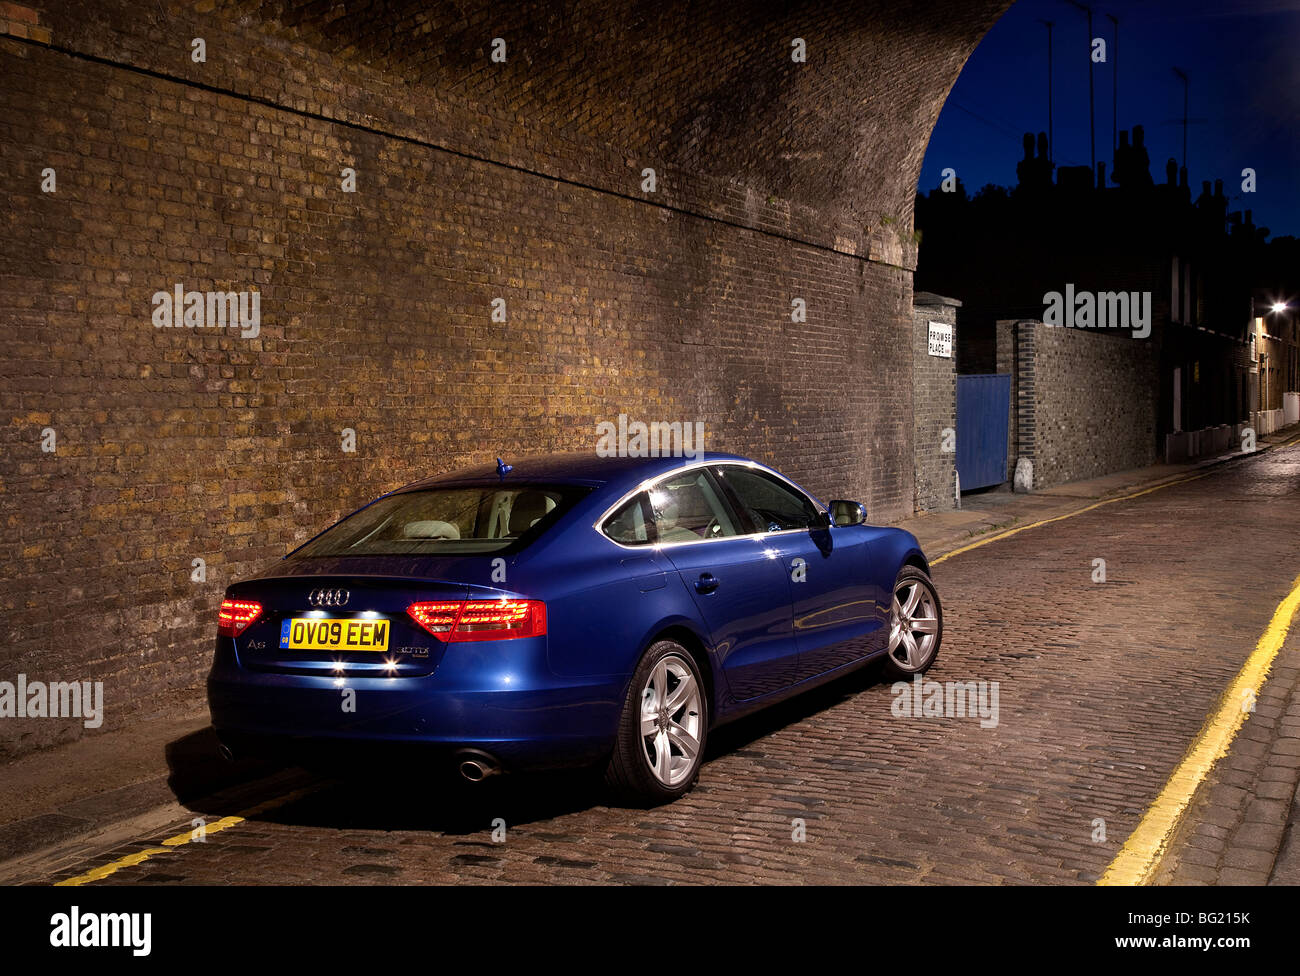 Audi A5 Sportback parked in a street in North London at night Stock Photo